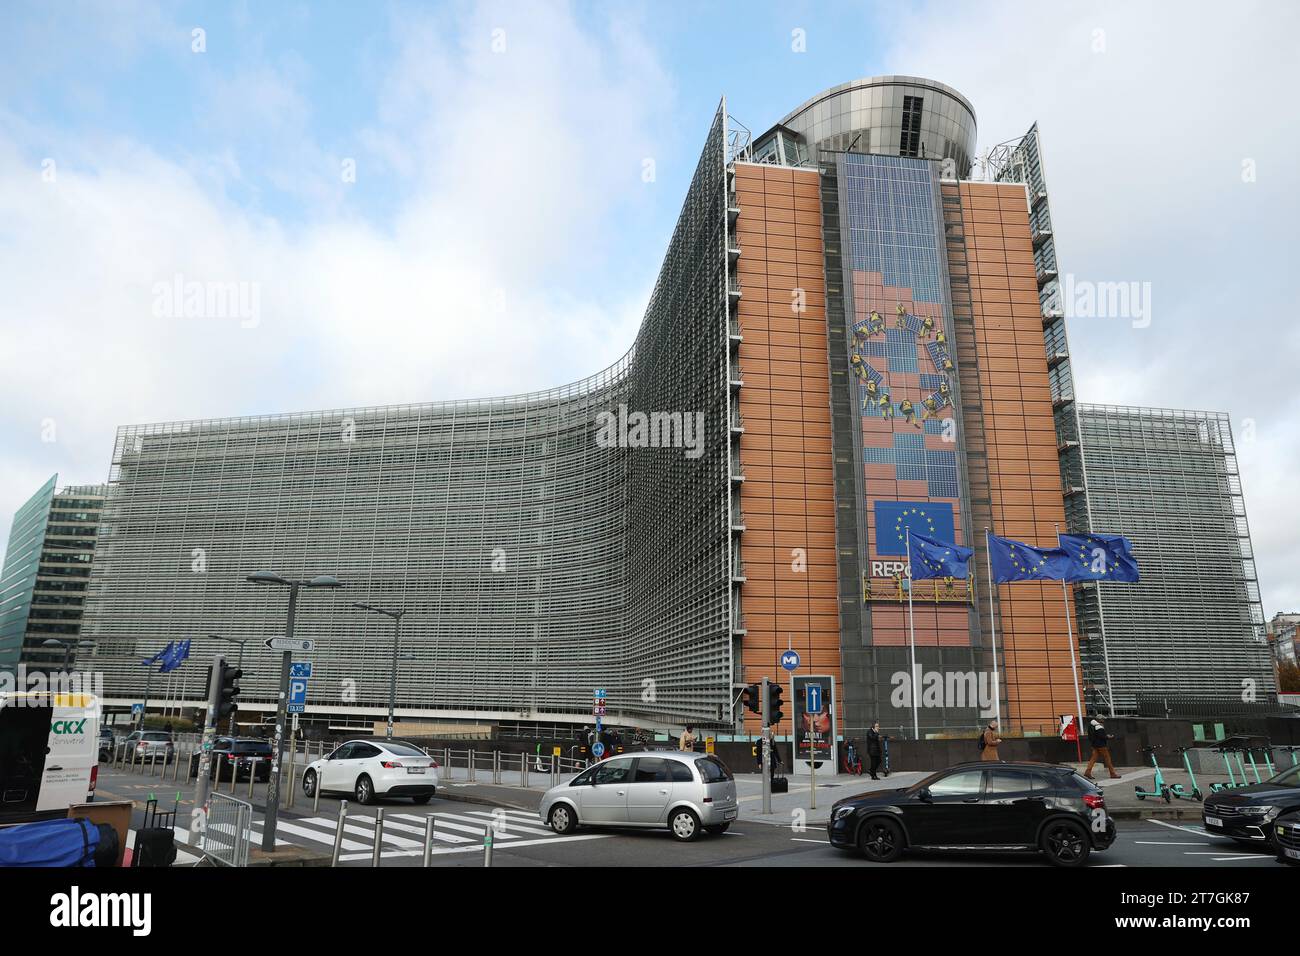 Brussels. 15th Nov, 2023. This photo taken on Nov. 15, 2023 shows the European Commission building in Brussels, Belgium. The European Union (EU) economy lost momentum in 2023, according to the European Commission's Autumn Economic Forecast published here on Wednesday. The Commission has downgraded its forecast for economic growth in both the EU and the eurozone this year to 0.6 percent from the previously projected 0.8 percent. Credit: Zhao Dingzhe/Xinhua/Alamy Live News Stock Photo